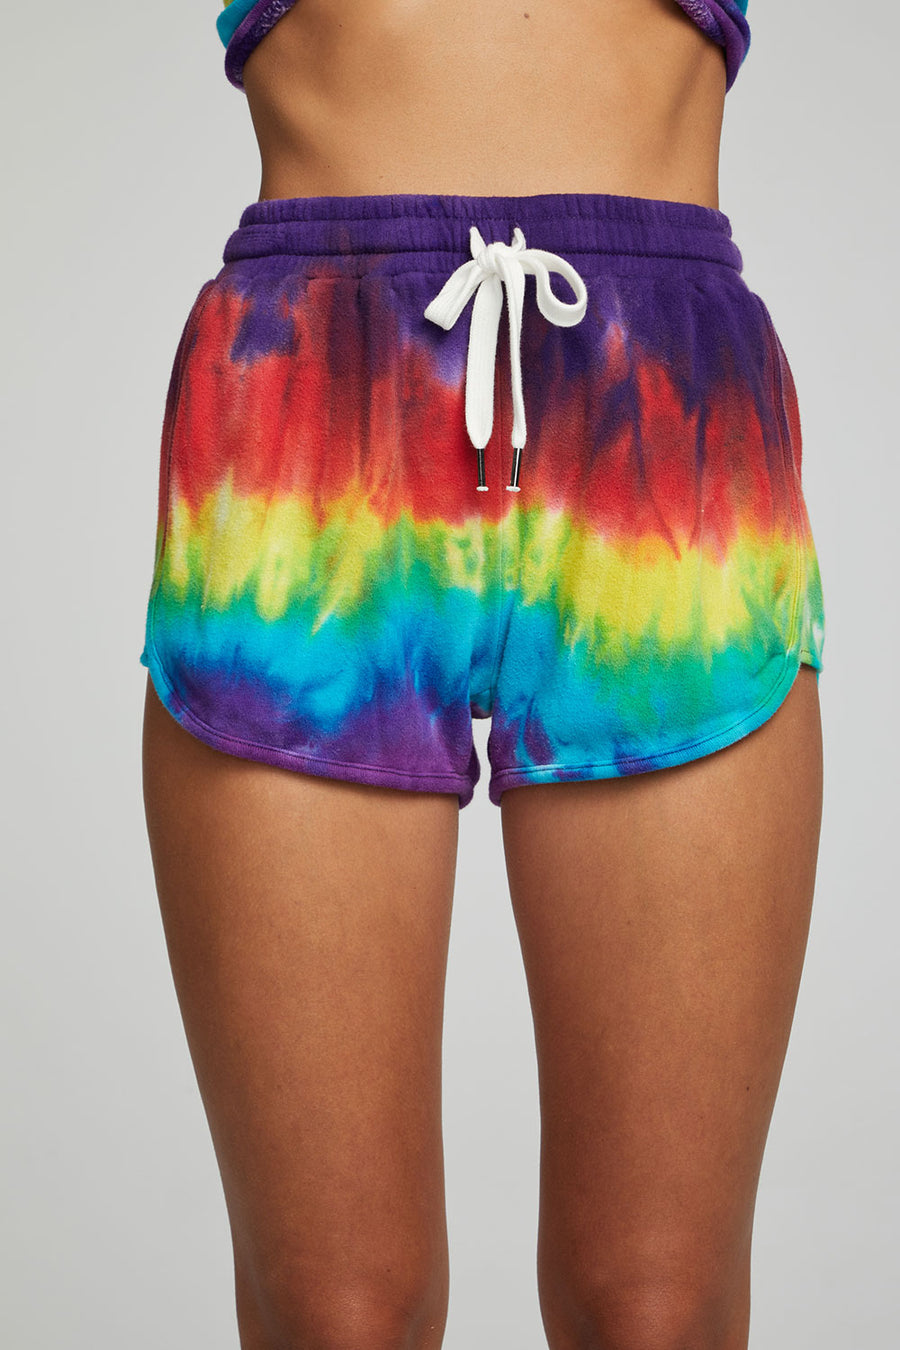 Heaven Shorts WOMENS chaserbrand